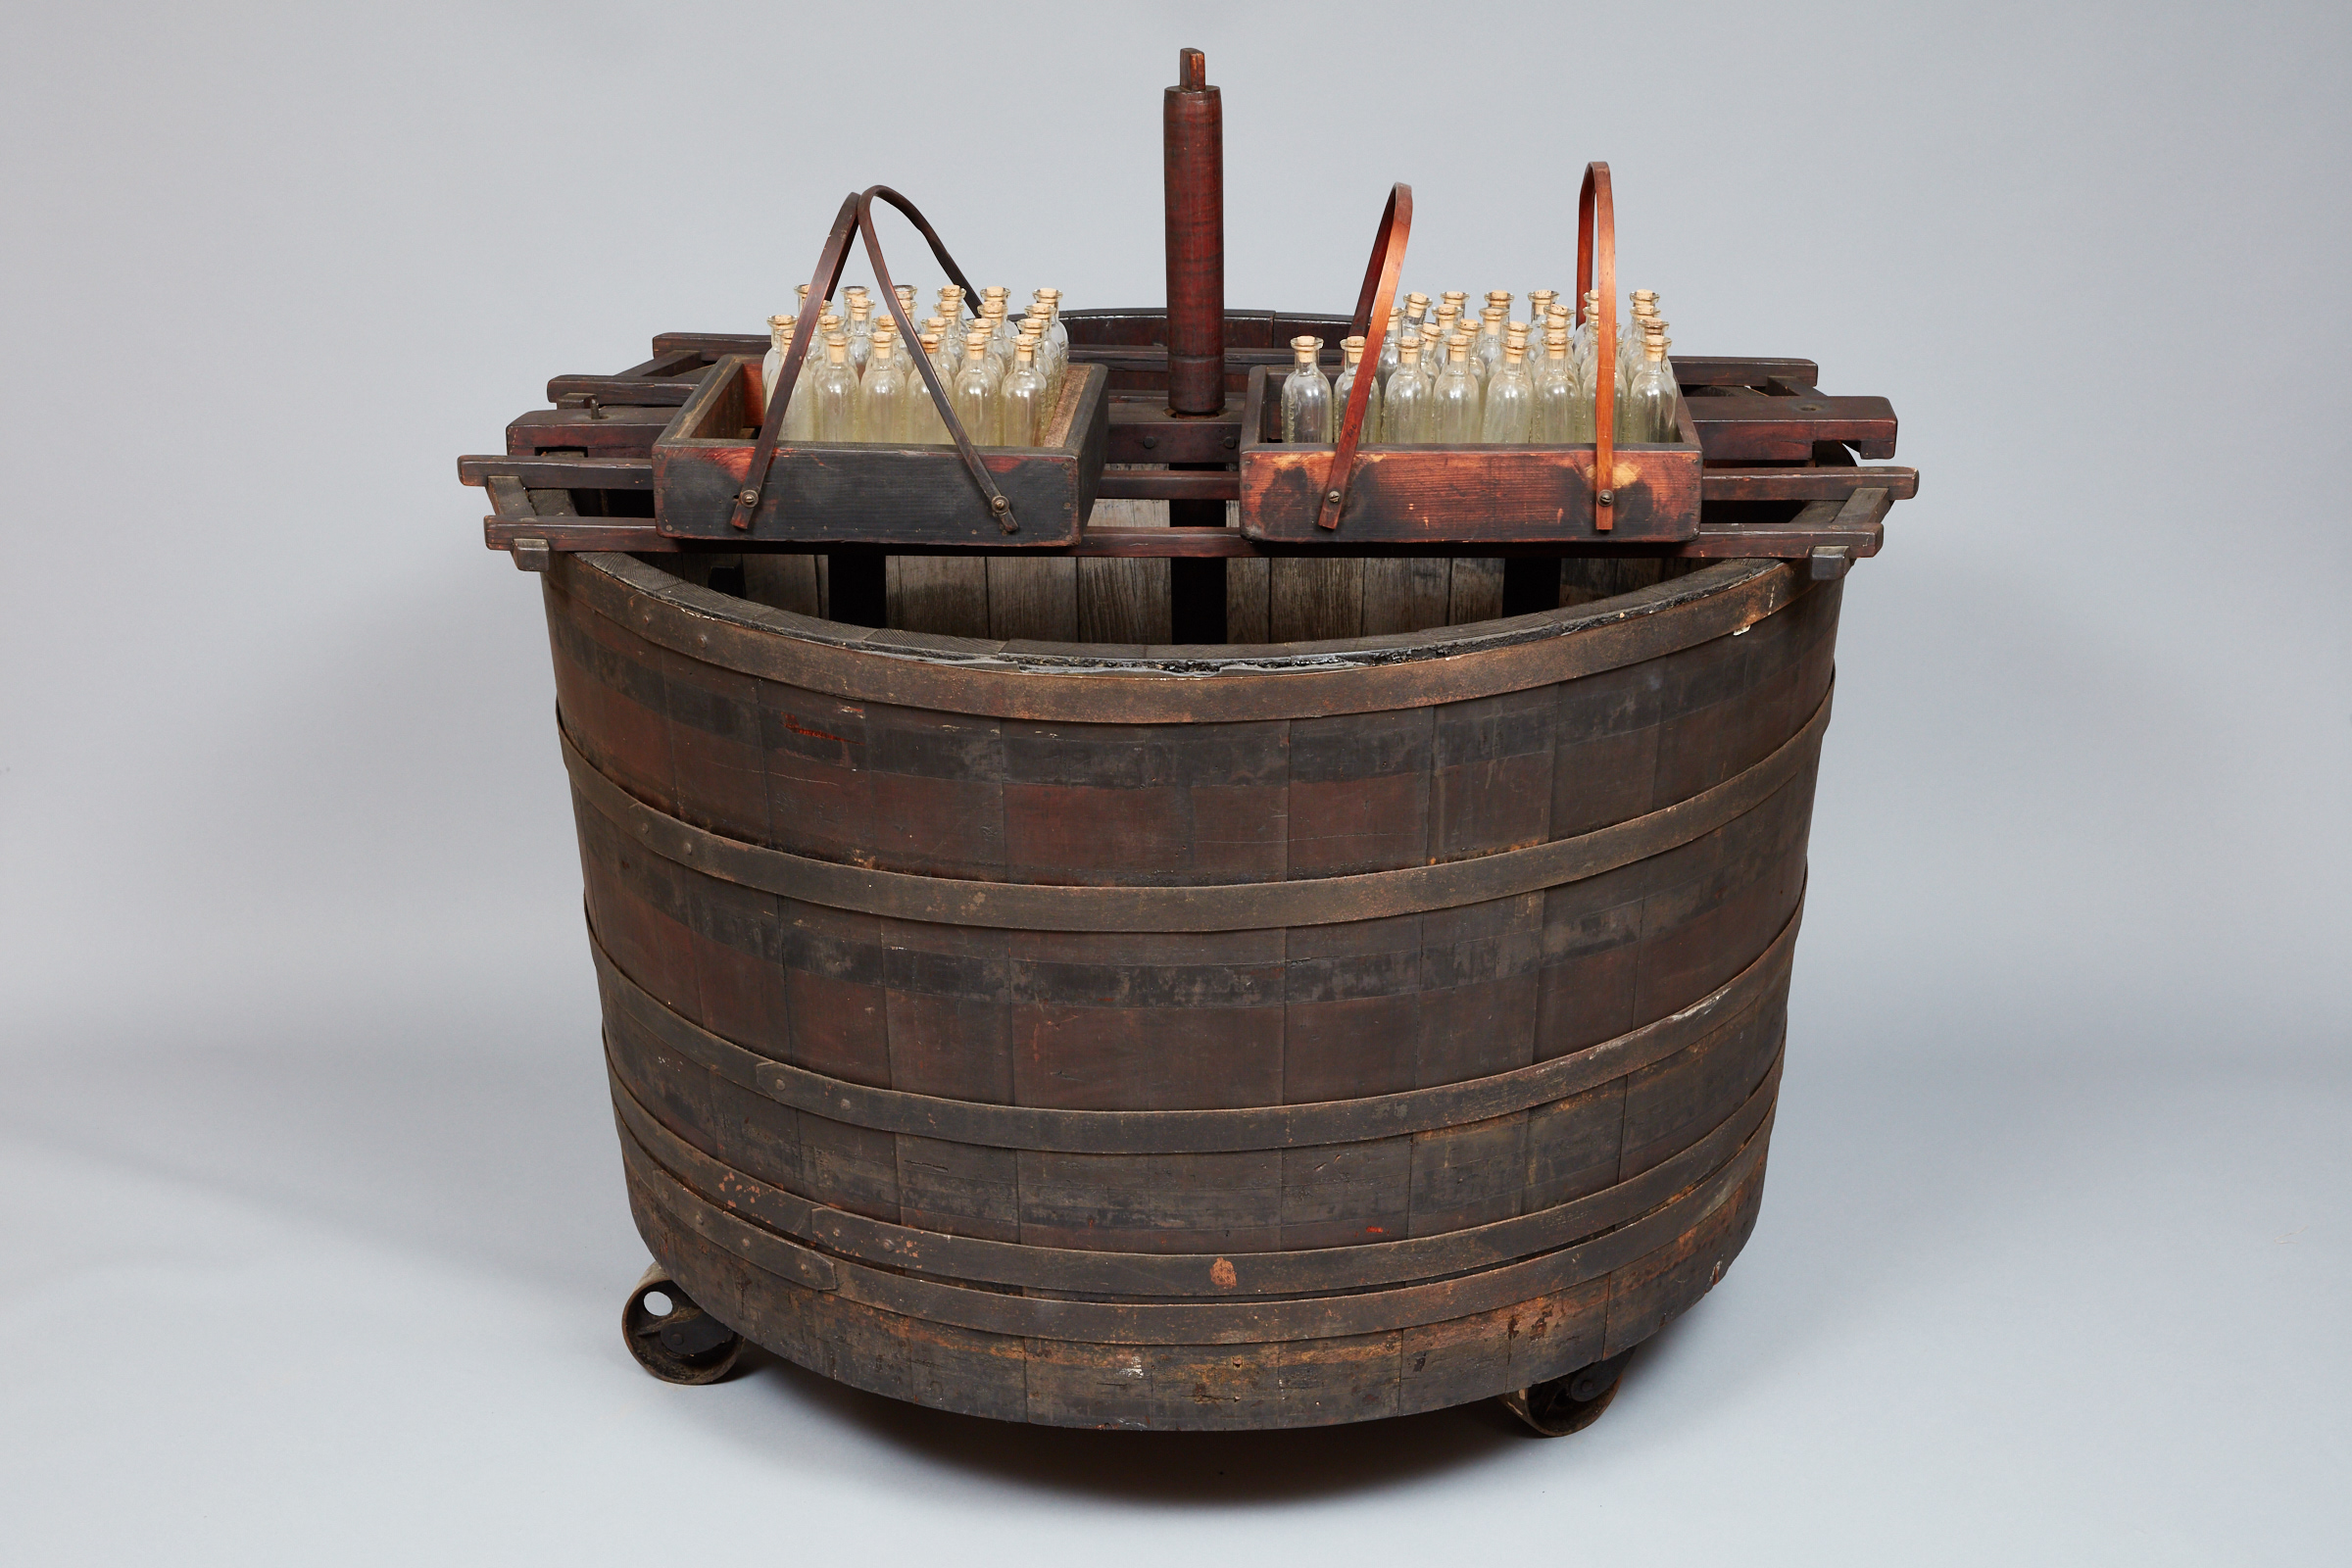 A wooden barrel with a lot of sticks in it.